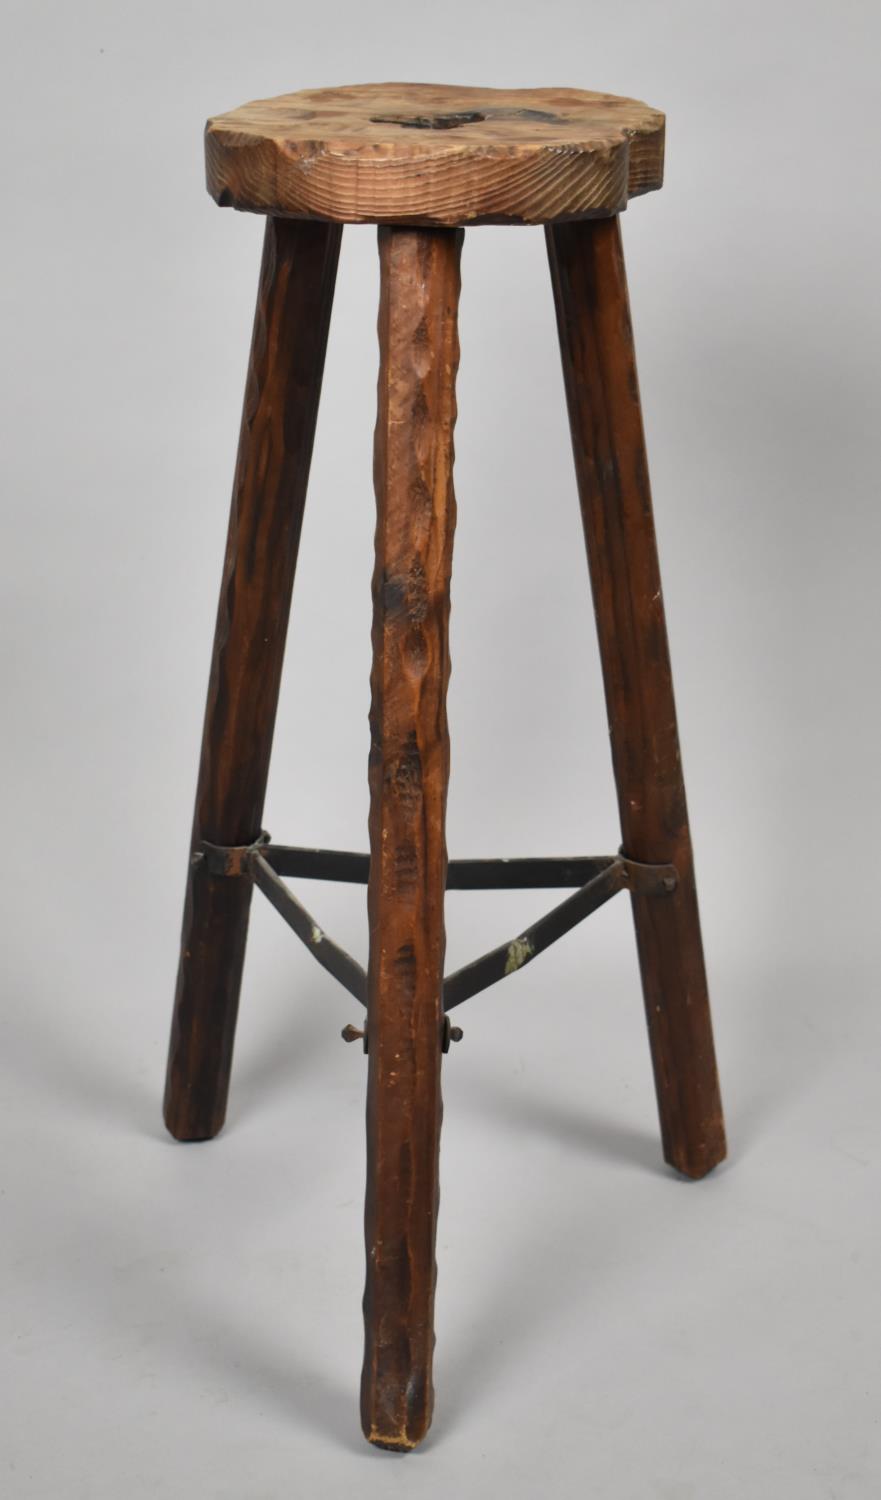 A Mid/Late 20th Century Rustic Tripod Stool with Iron Work Stretcher, 70cm high